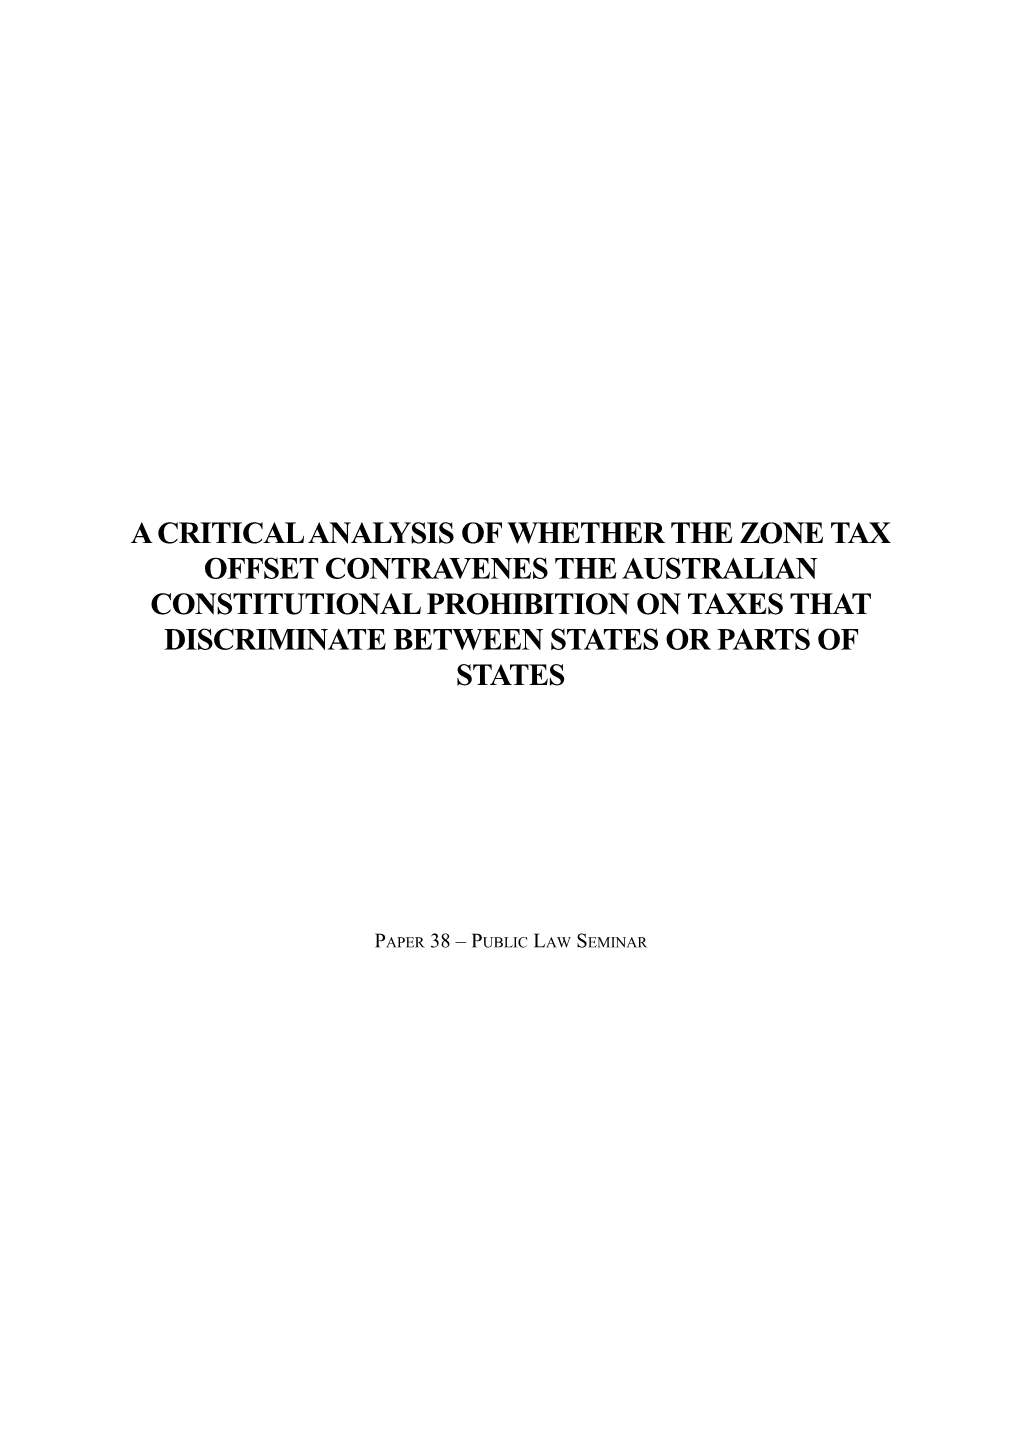 A Critical Analysis of Whether the Zone Tax Offset Contravenes the Australian Constitutional